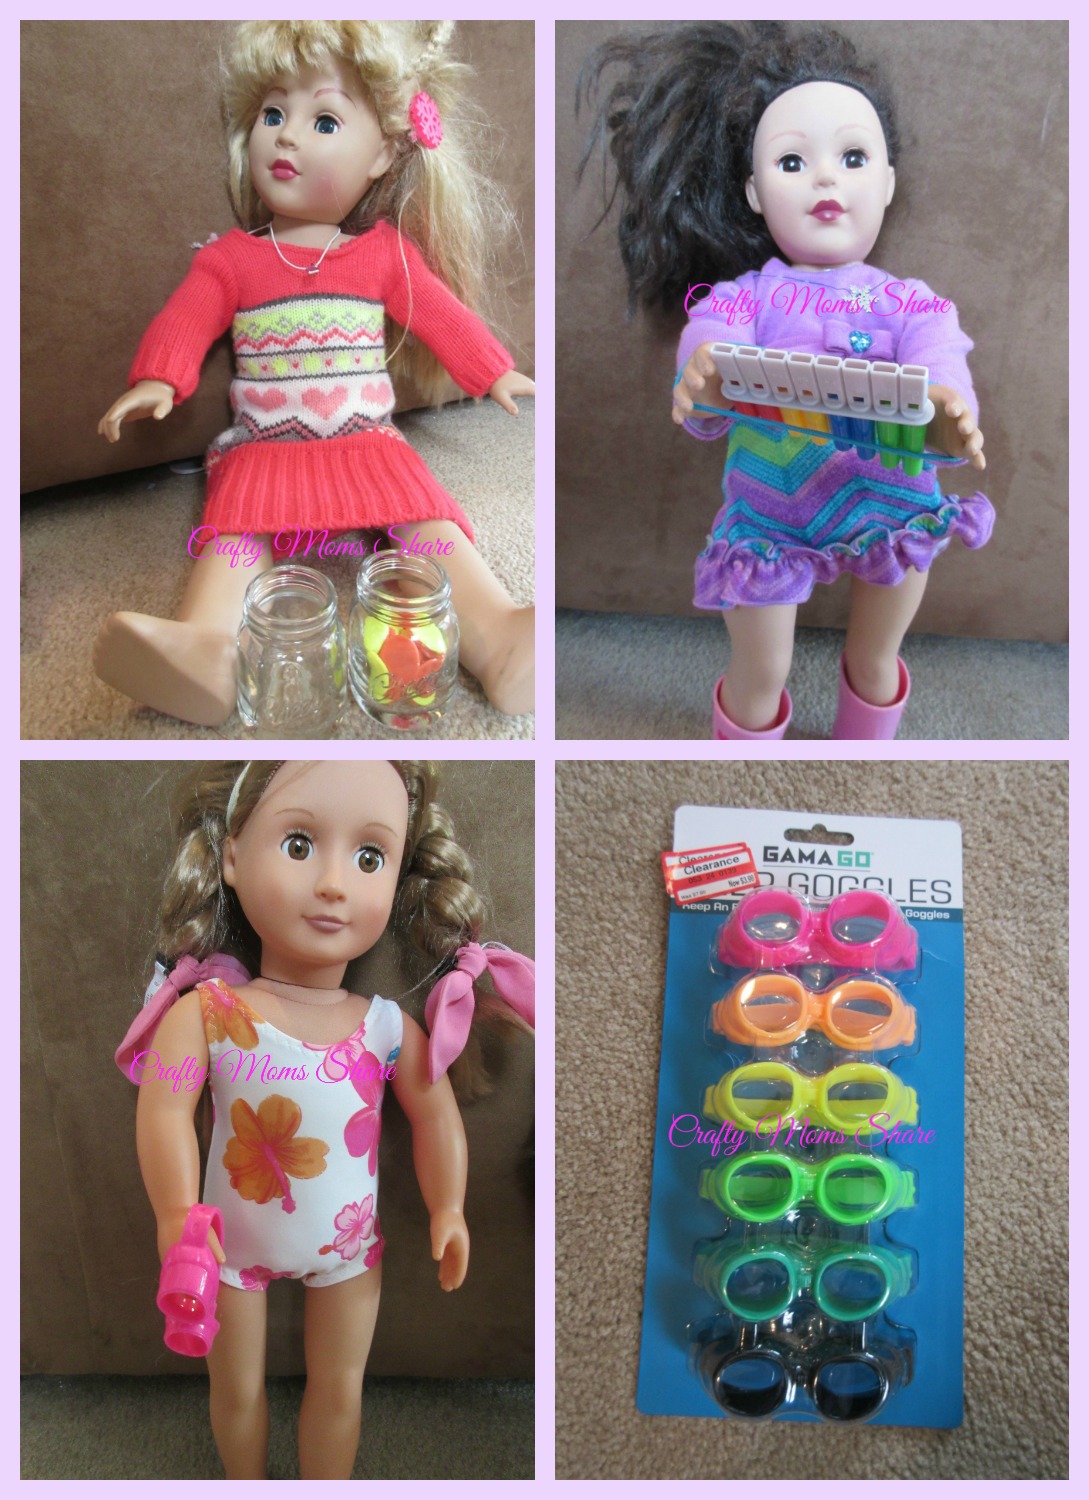 Crafty Moms Share: Cheap Finds: Doll Accessories to Buy or Make